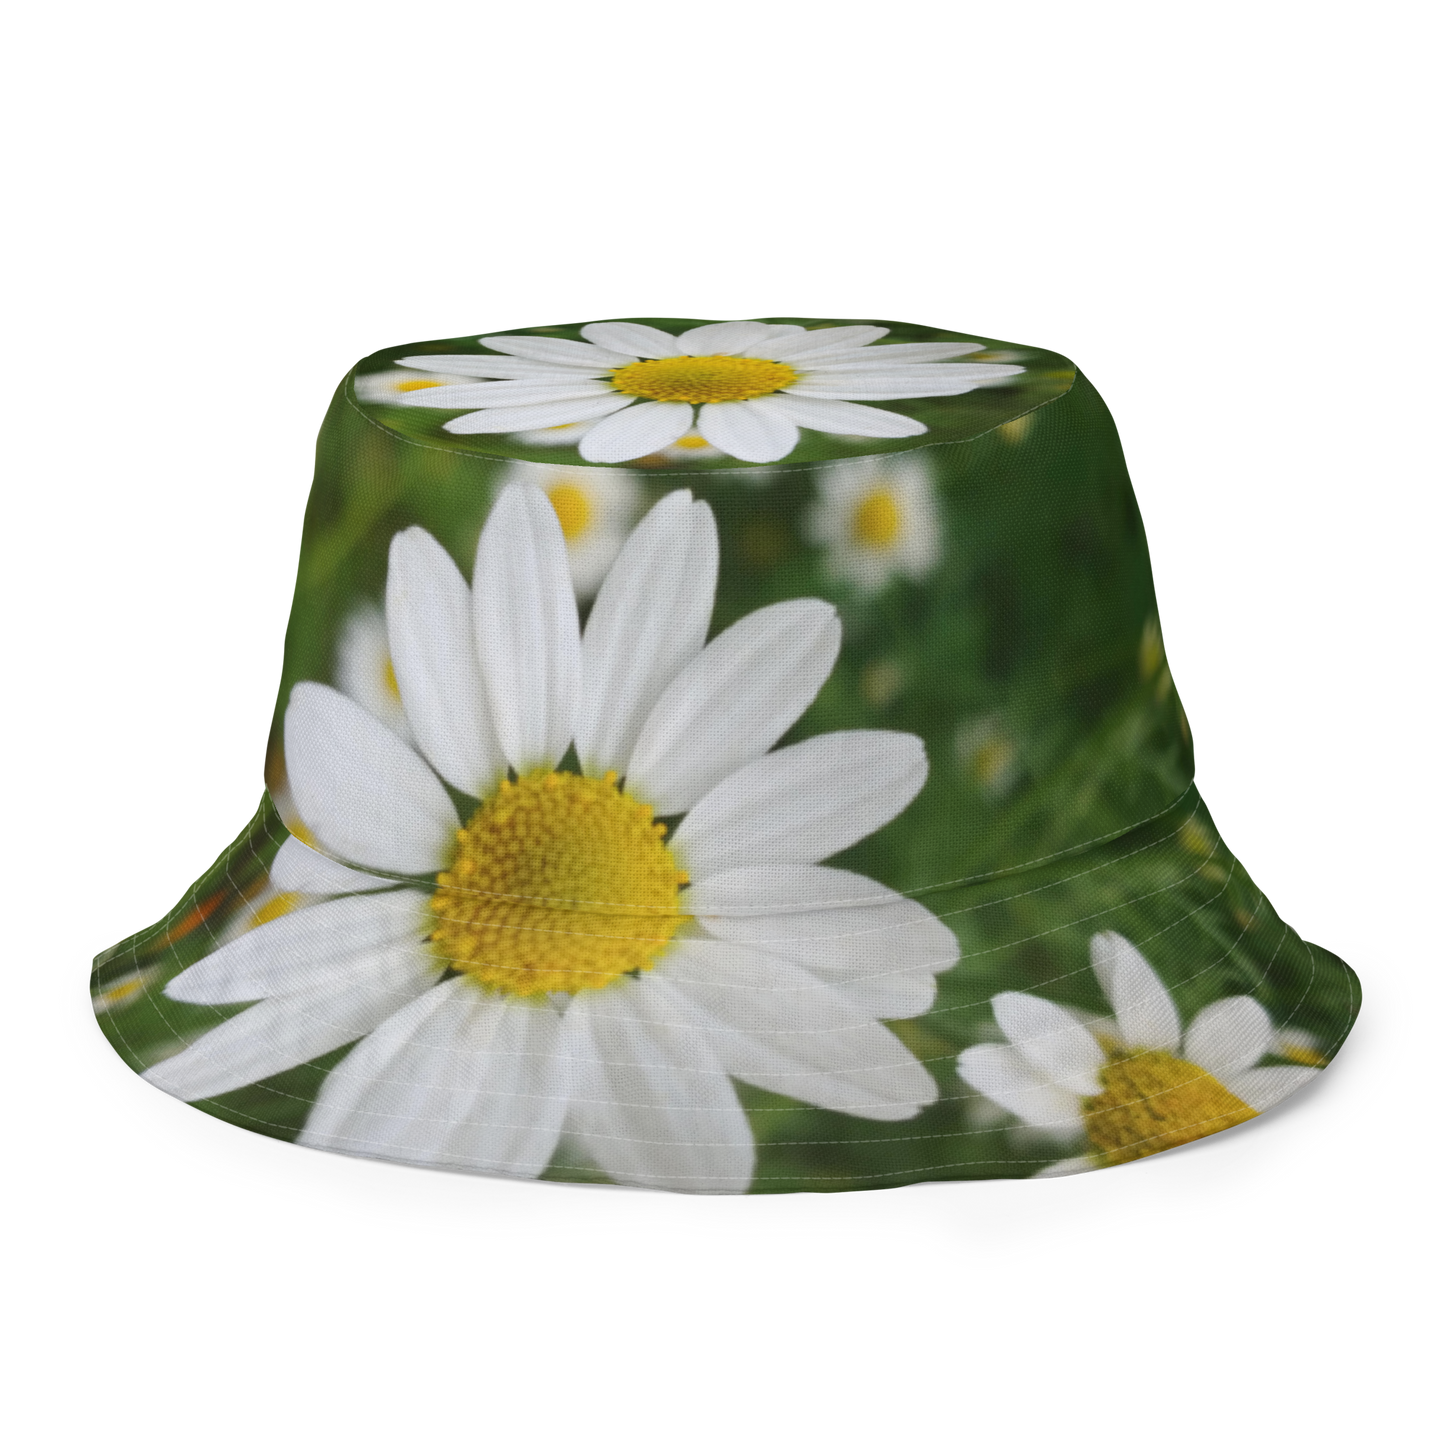 The FLOWER LOVE Collection - "Daisy Daydreams" Design Premium Reversible Bucket Hat - Yellow Inside - Beach Hat, Gifts for Her